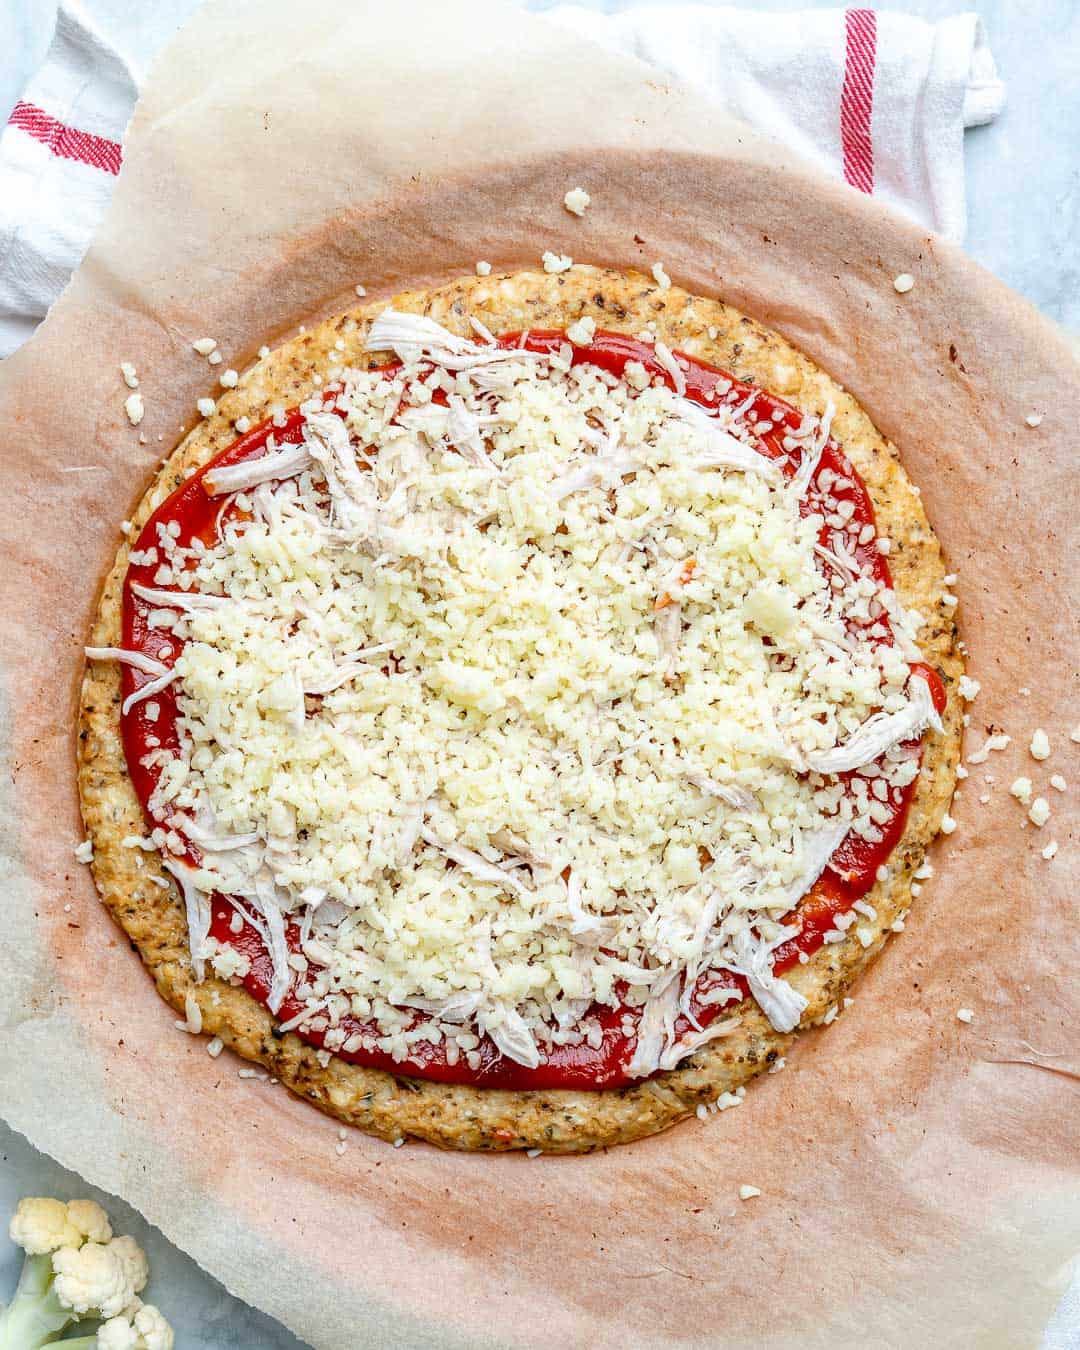 Add sauce and toppings and bake until melted.